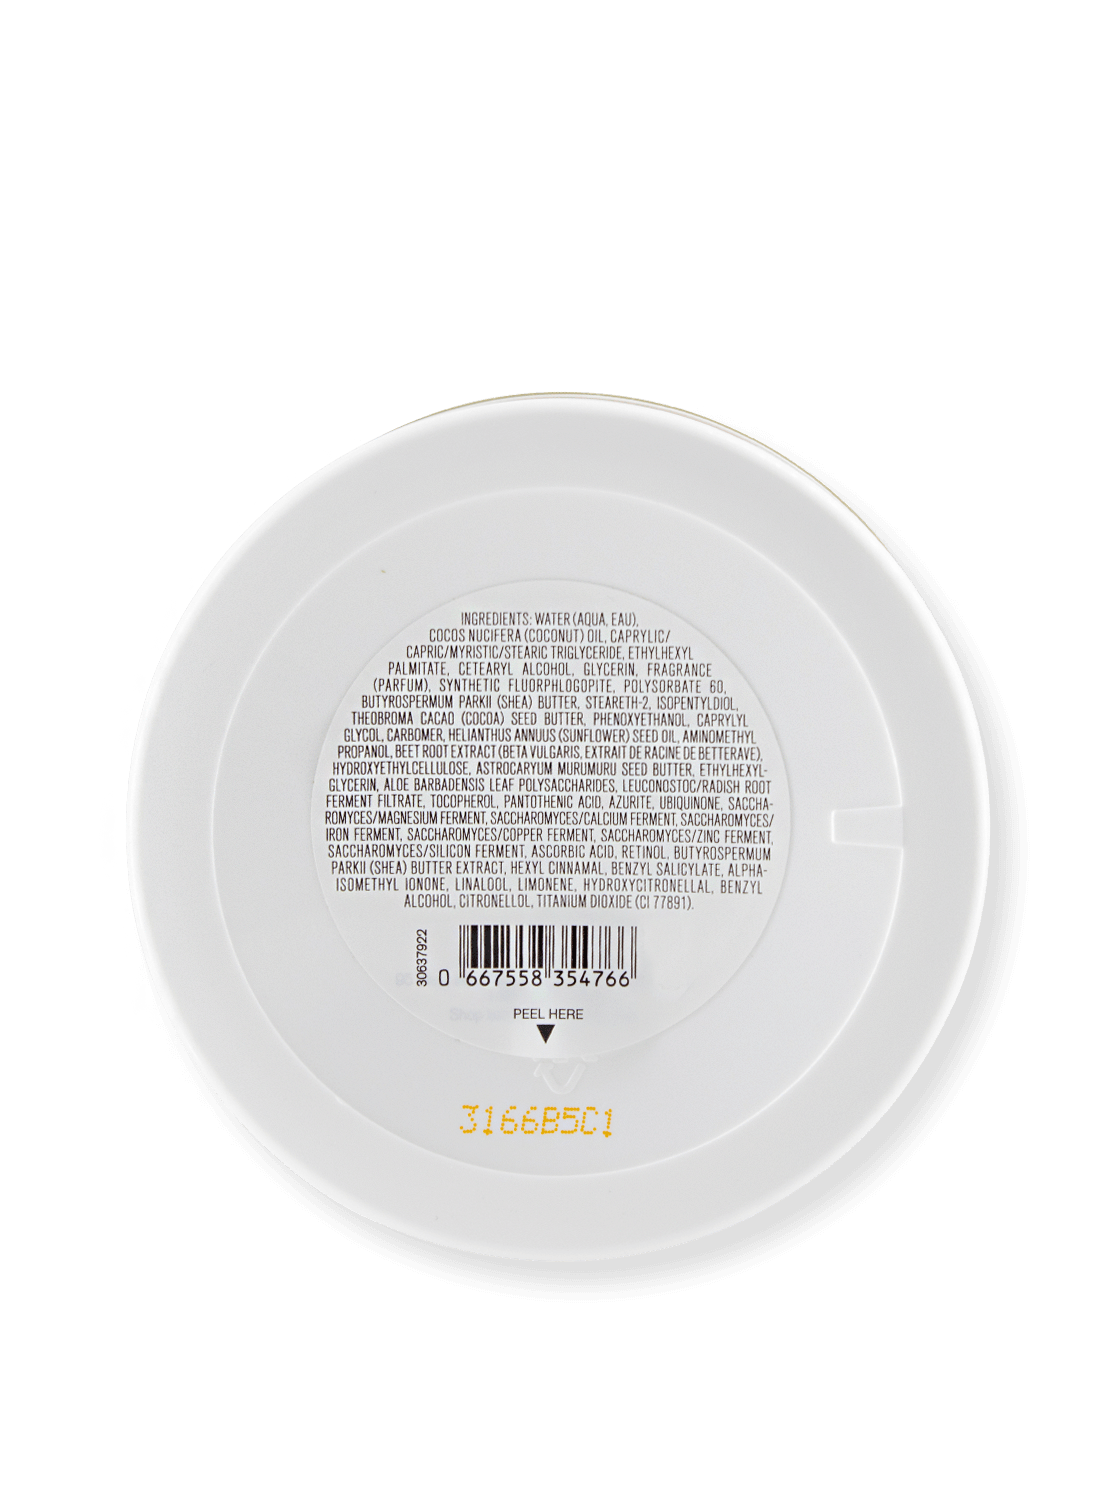 Body Butter - In the Stars - 185g